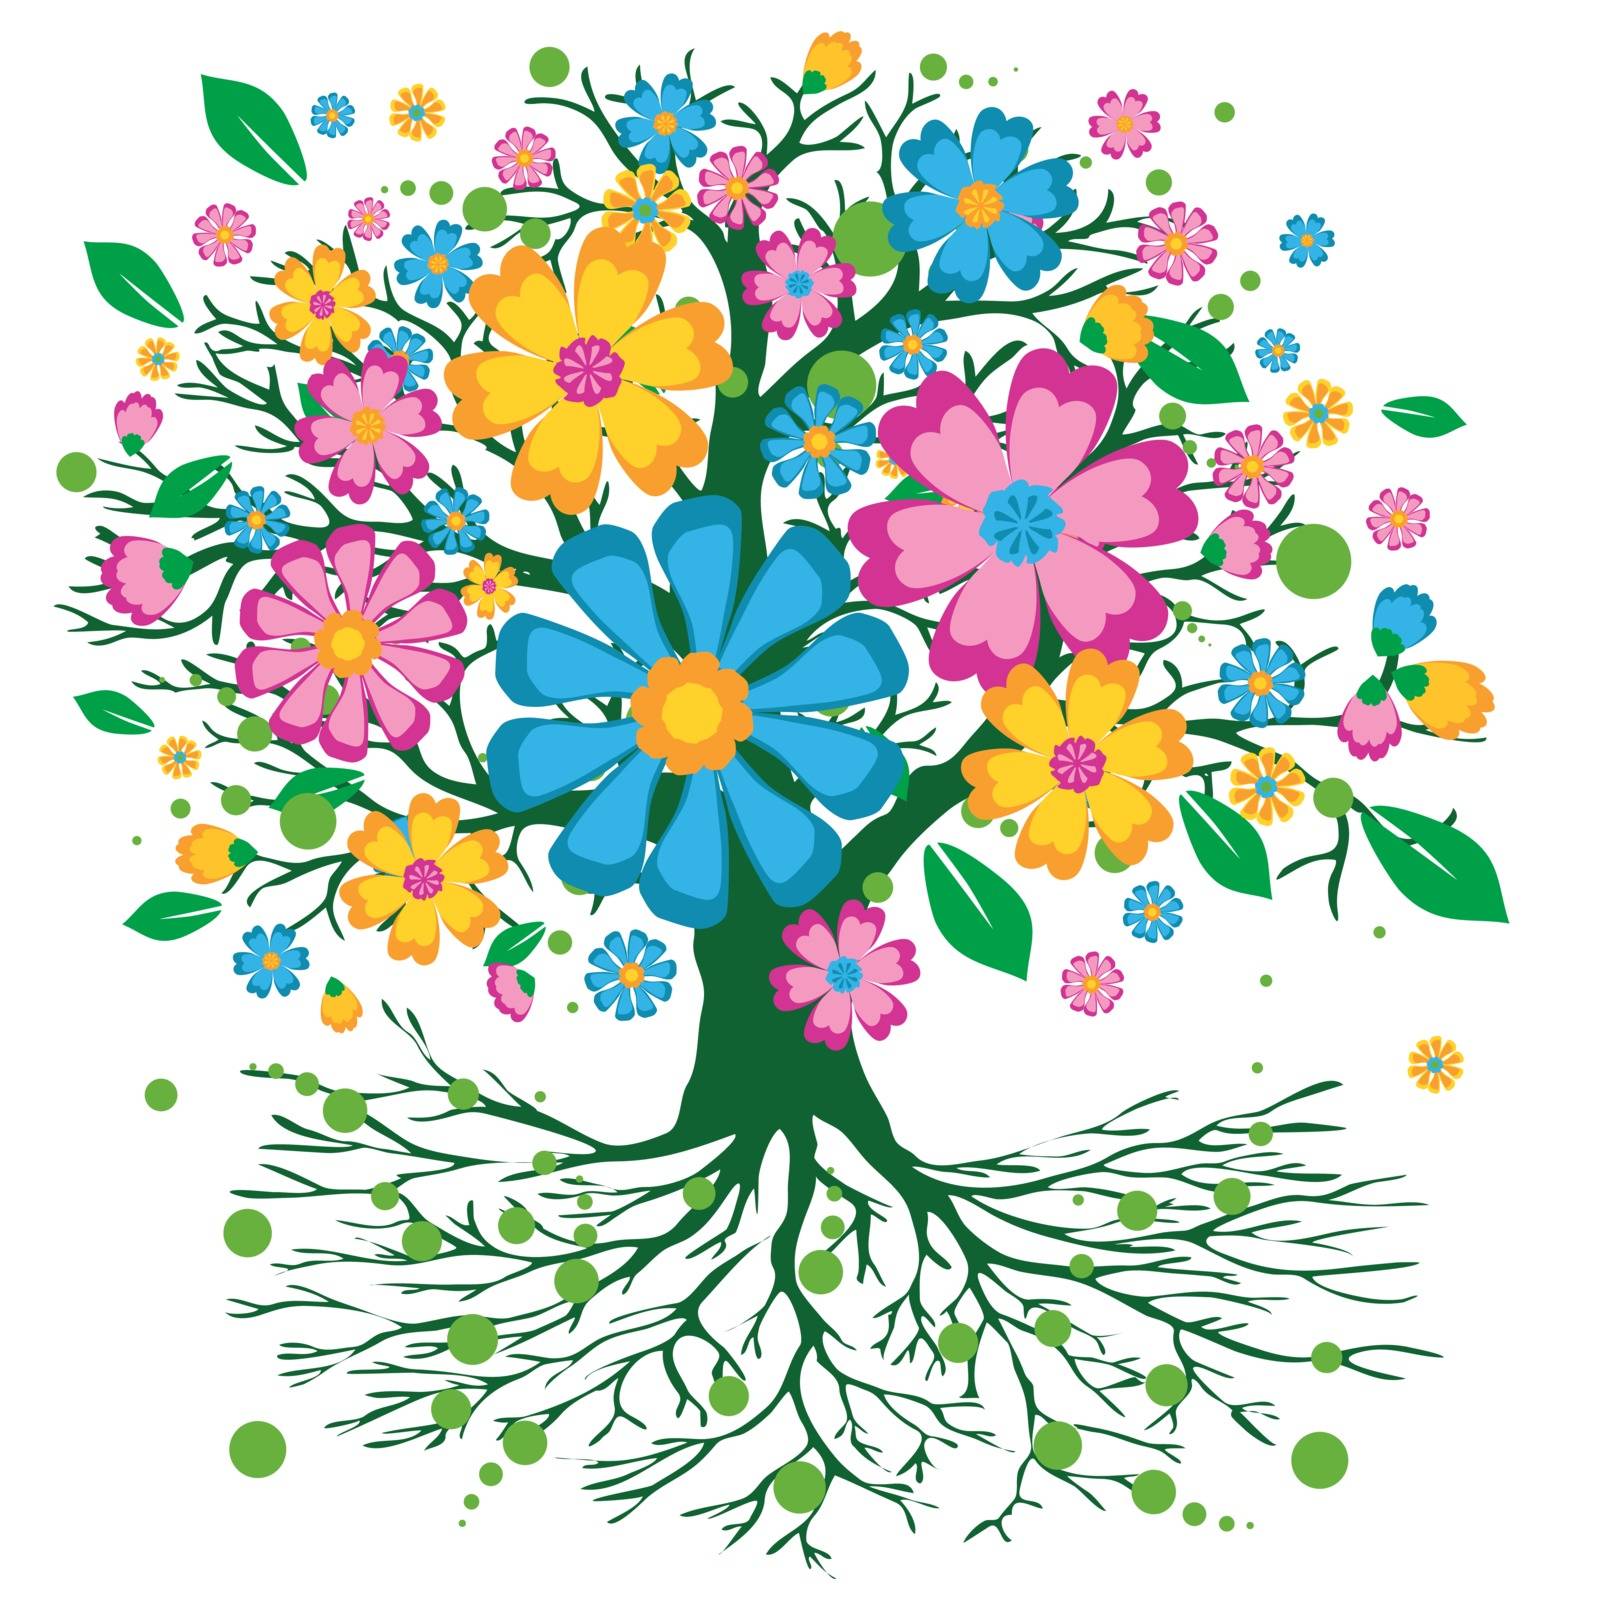 Tree of life flower version by Bwise